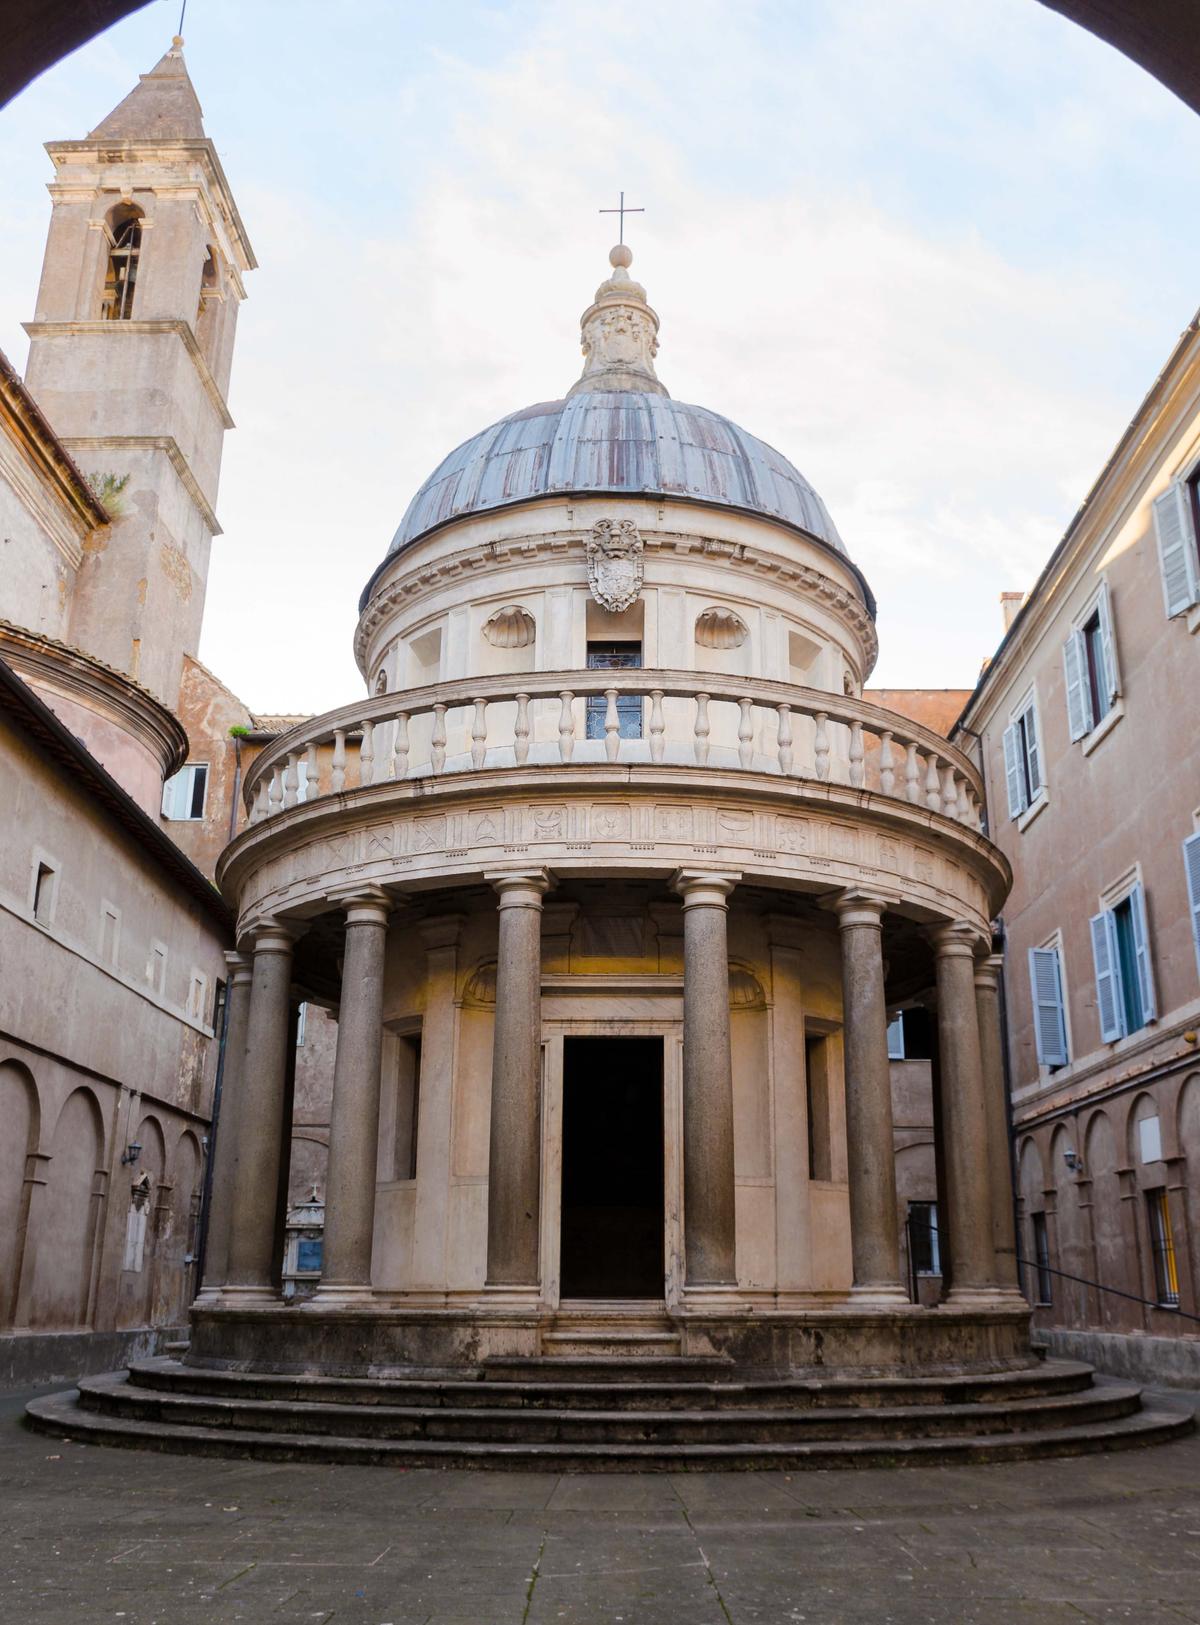 The Tempietto of Donato Bramante is the first example of High Renaissance architecture that inspired St. Peter's Basilica in the Vatican. (Em Campos/Shutterstock)